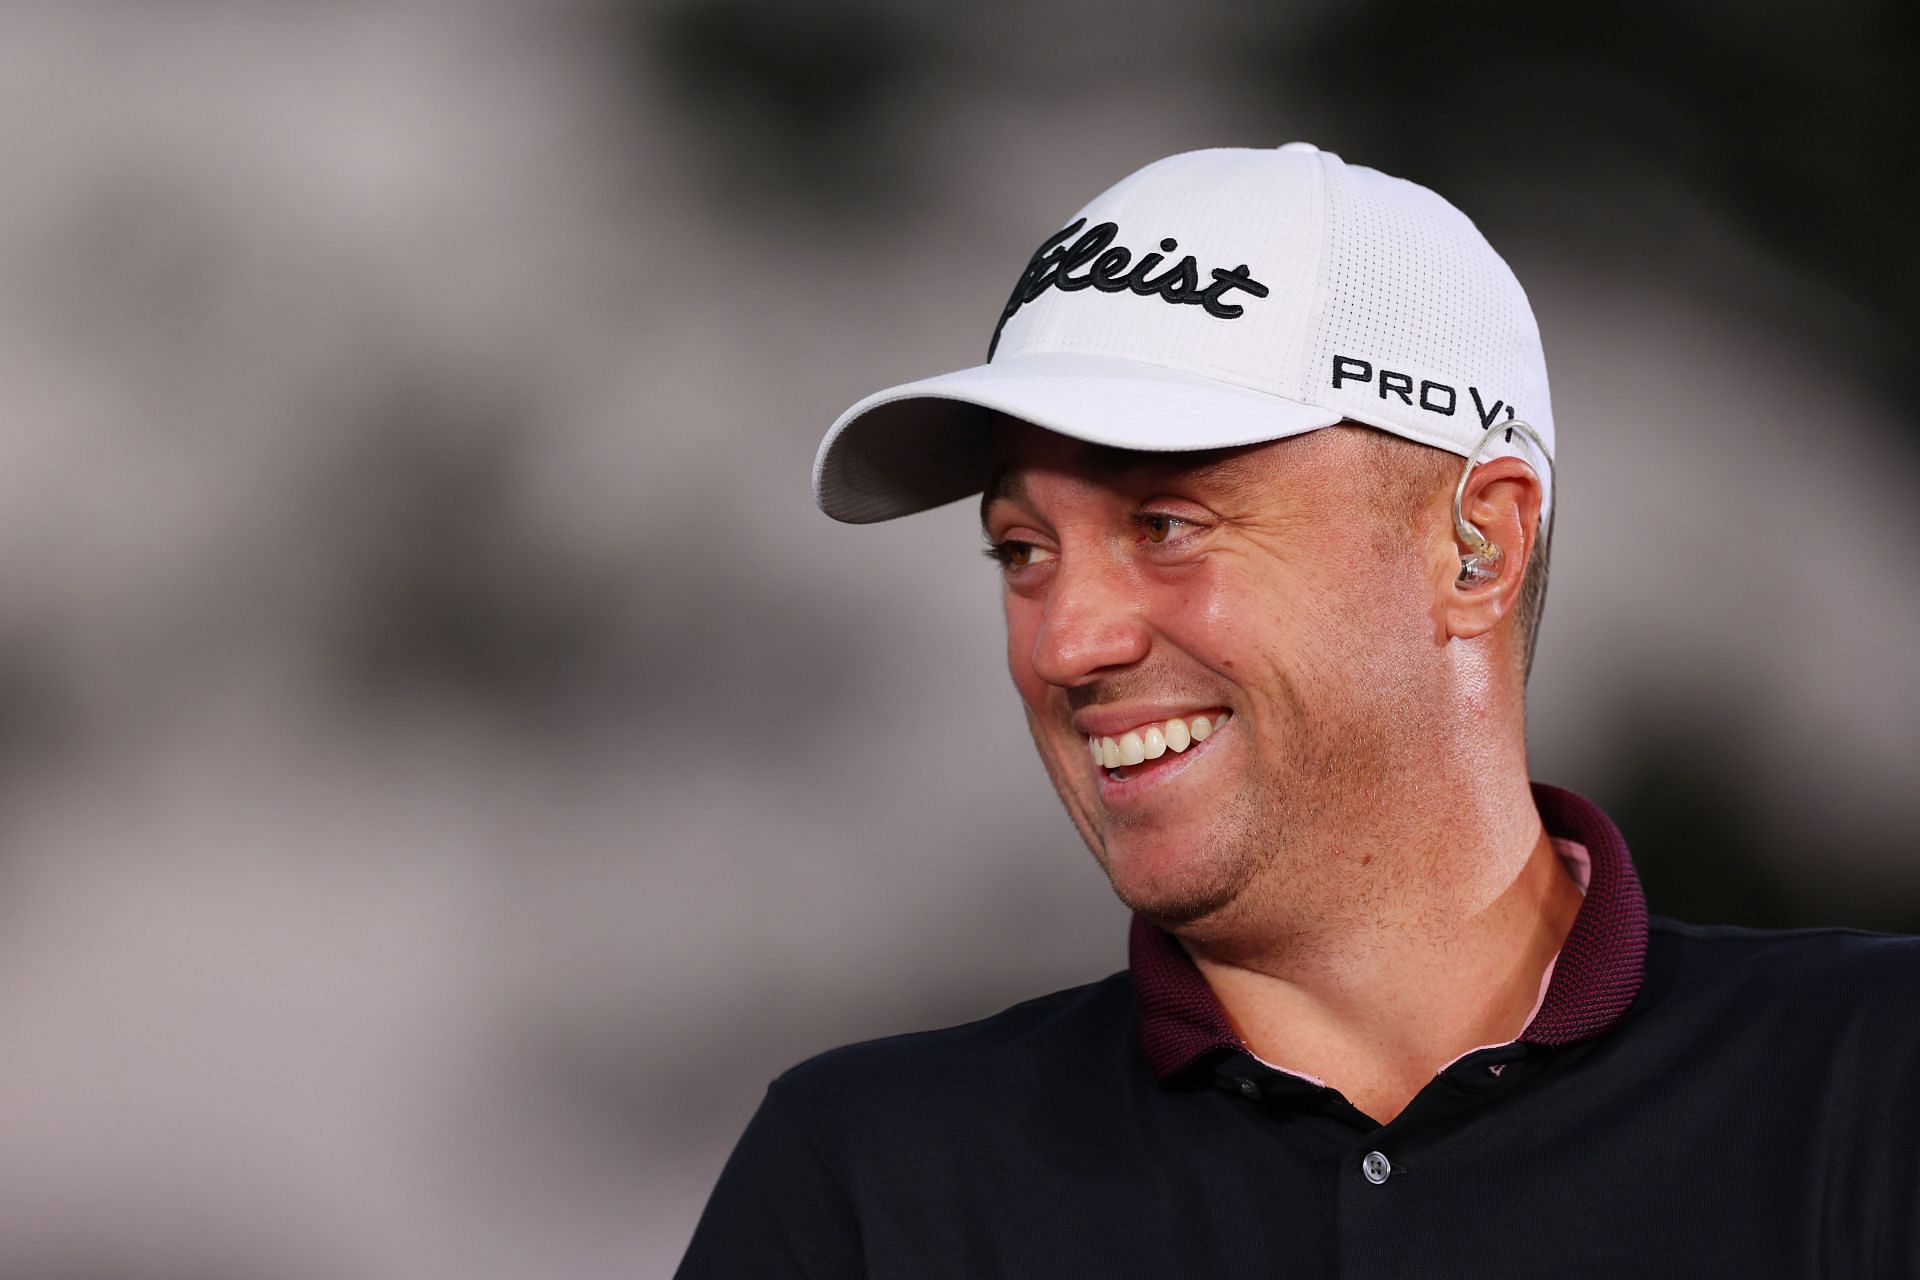 Justin Thomas at The Match 7 at Pelican (Image via Mike Ehrmann/Getty Images for The Match)